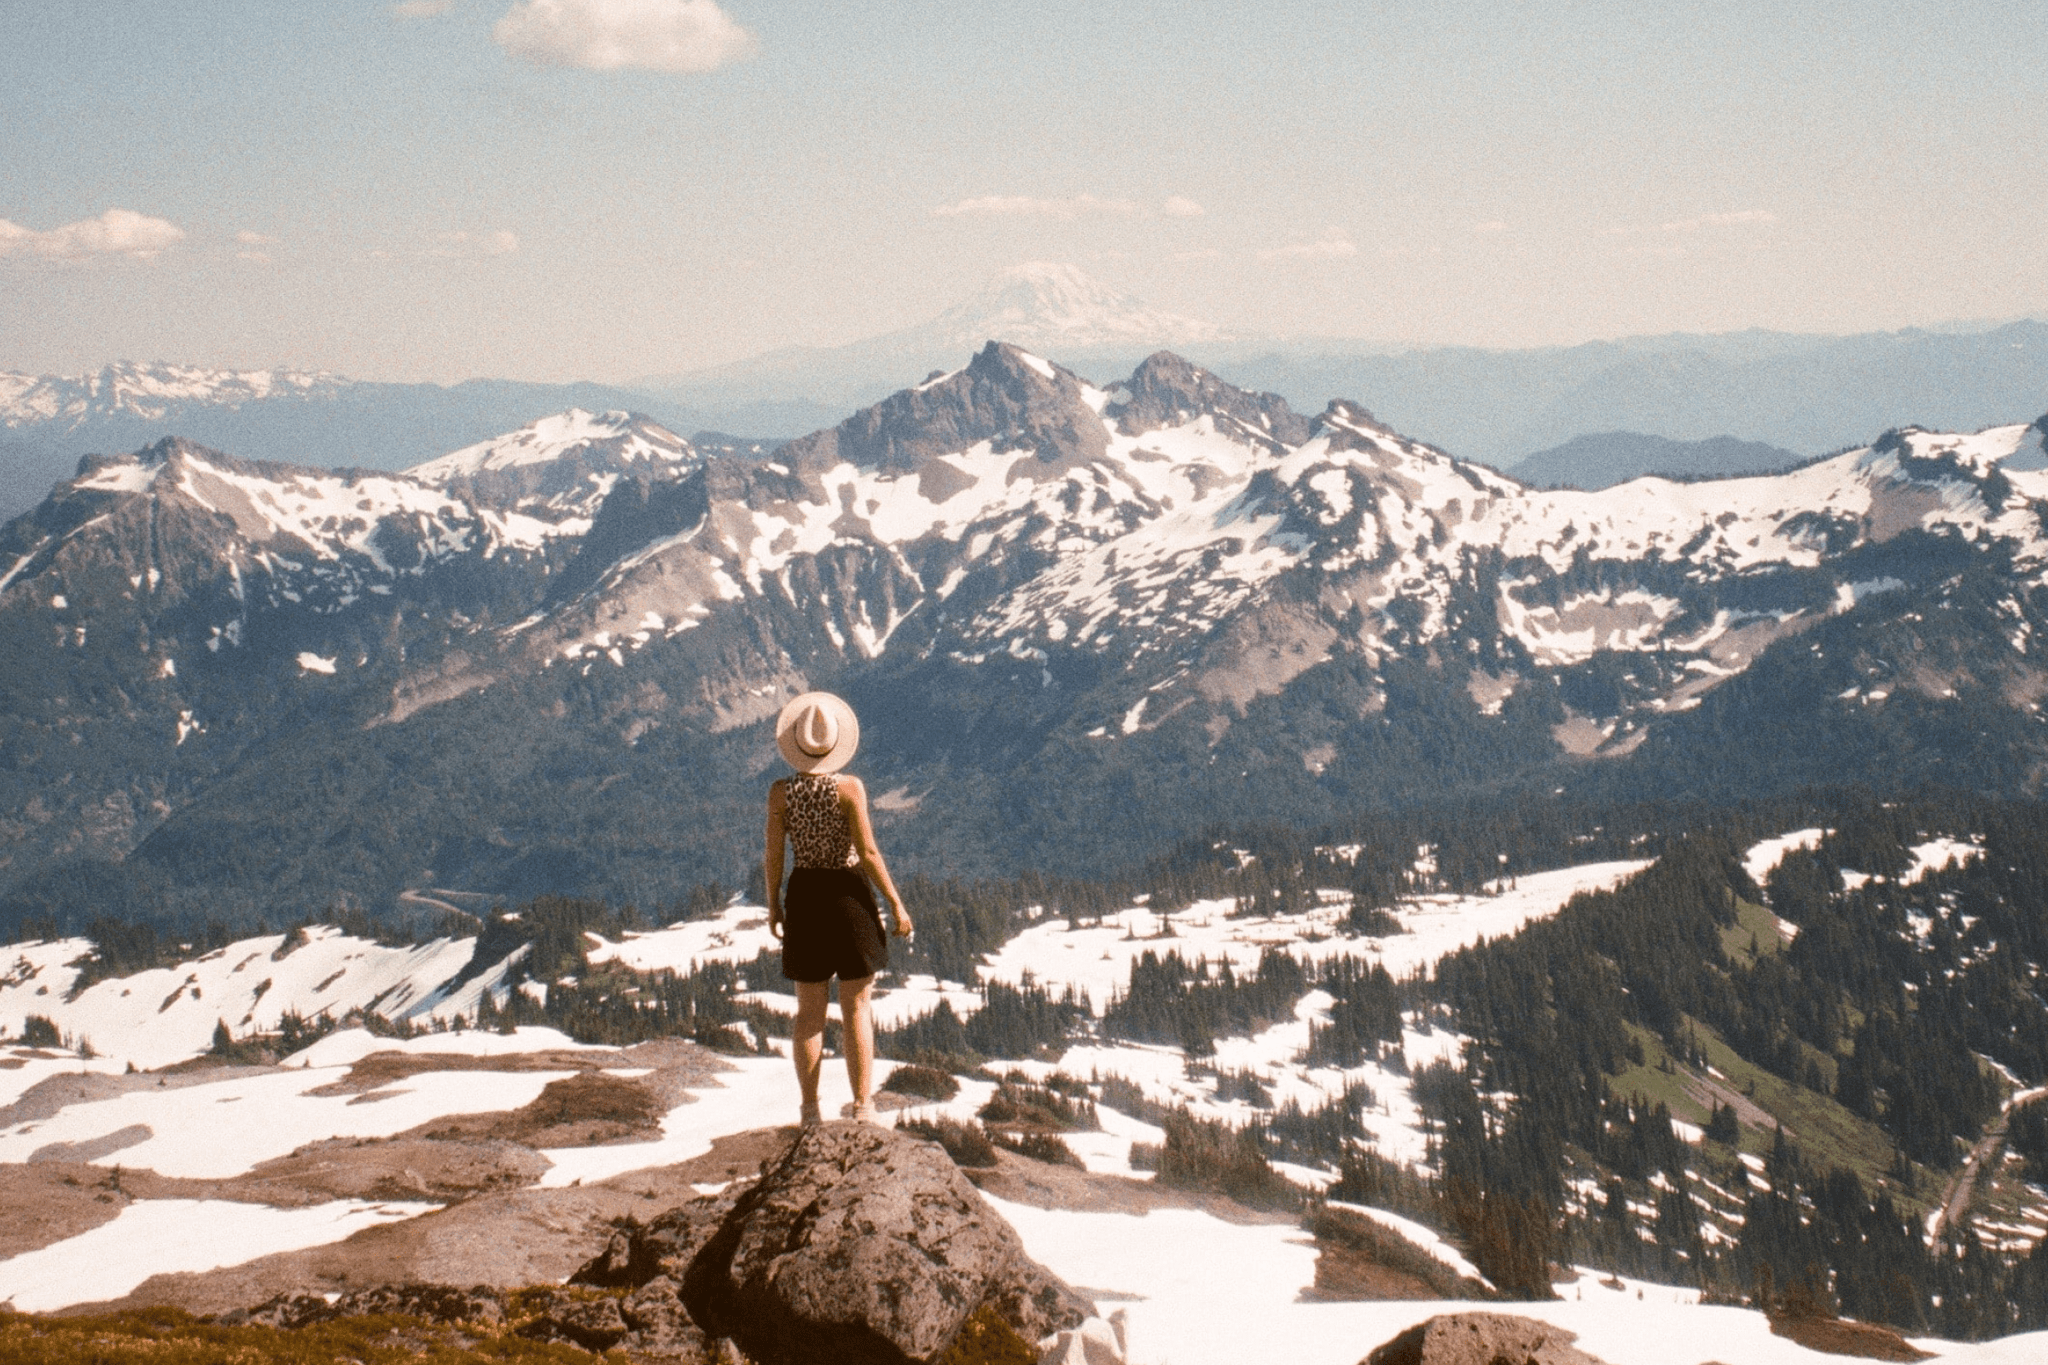 Woman standing on mountain peak, admiring snow-capped peaks in the distance.